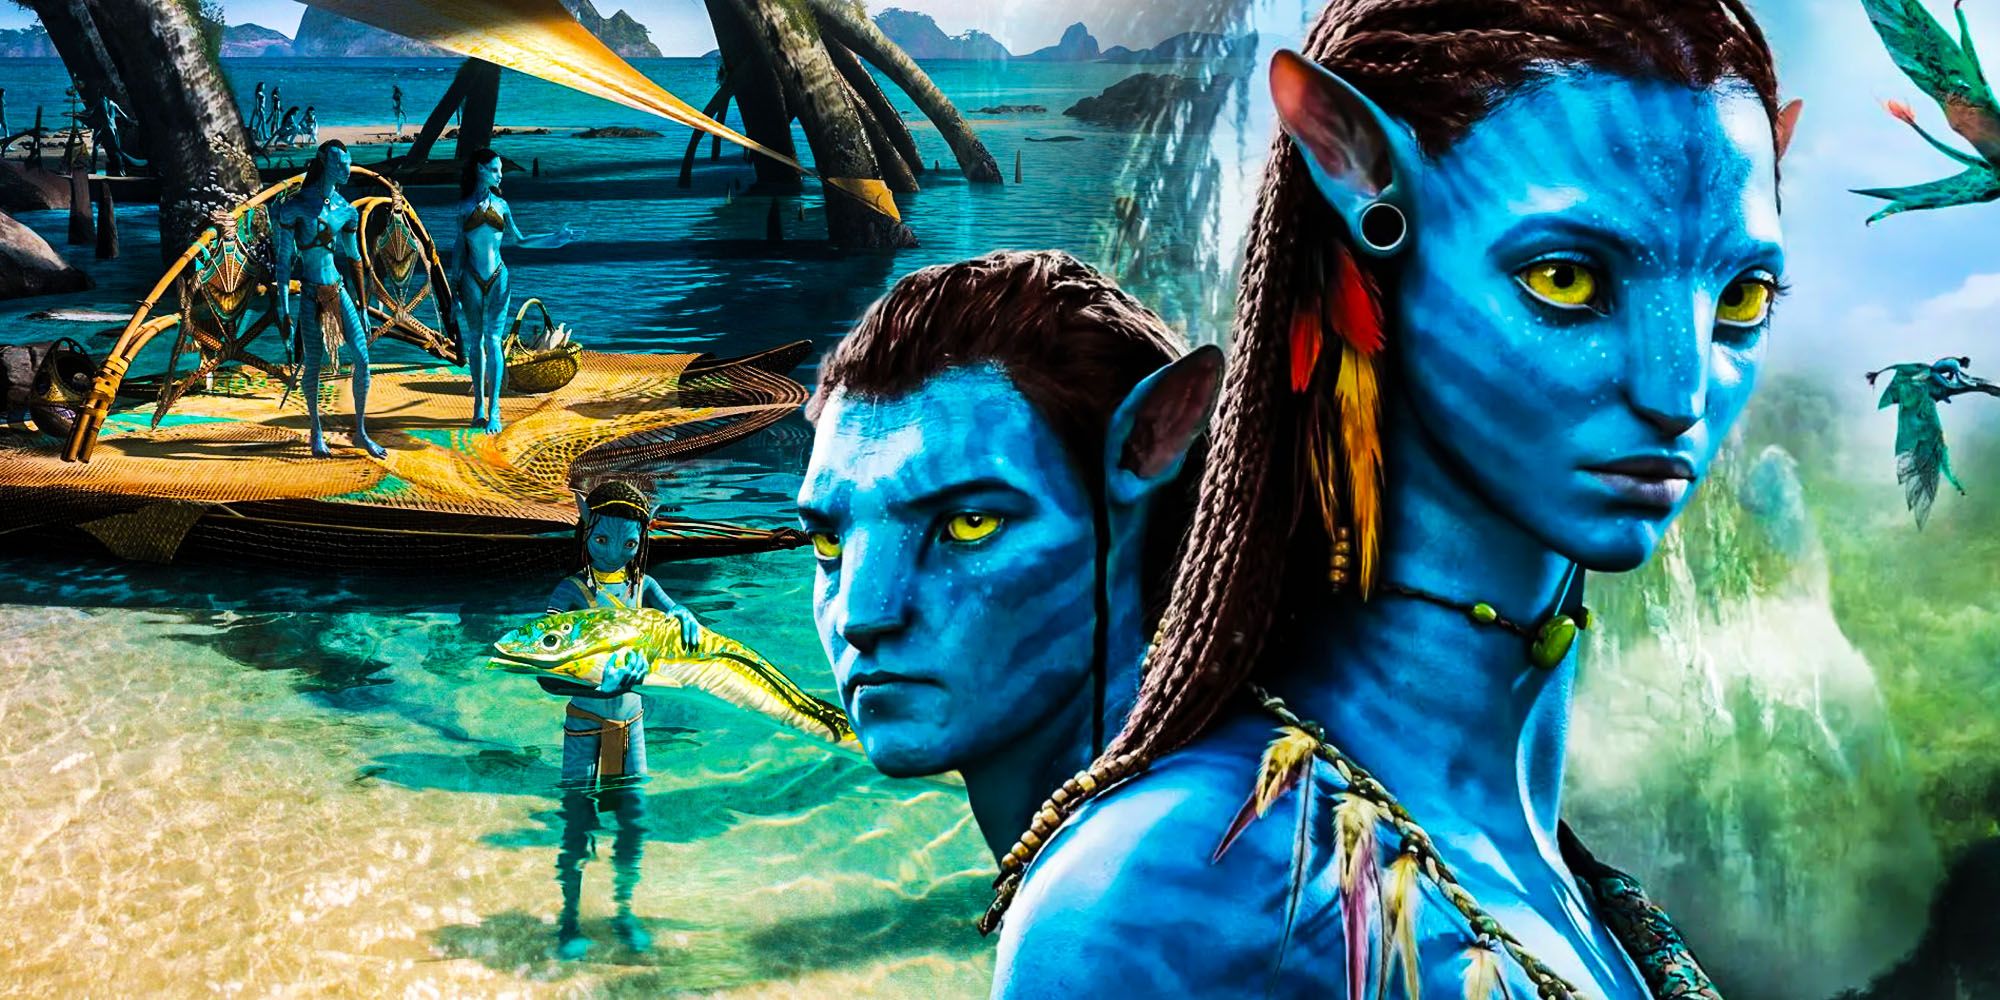 Avatar 2 is more important to disney